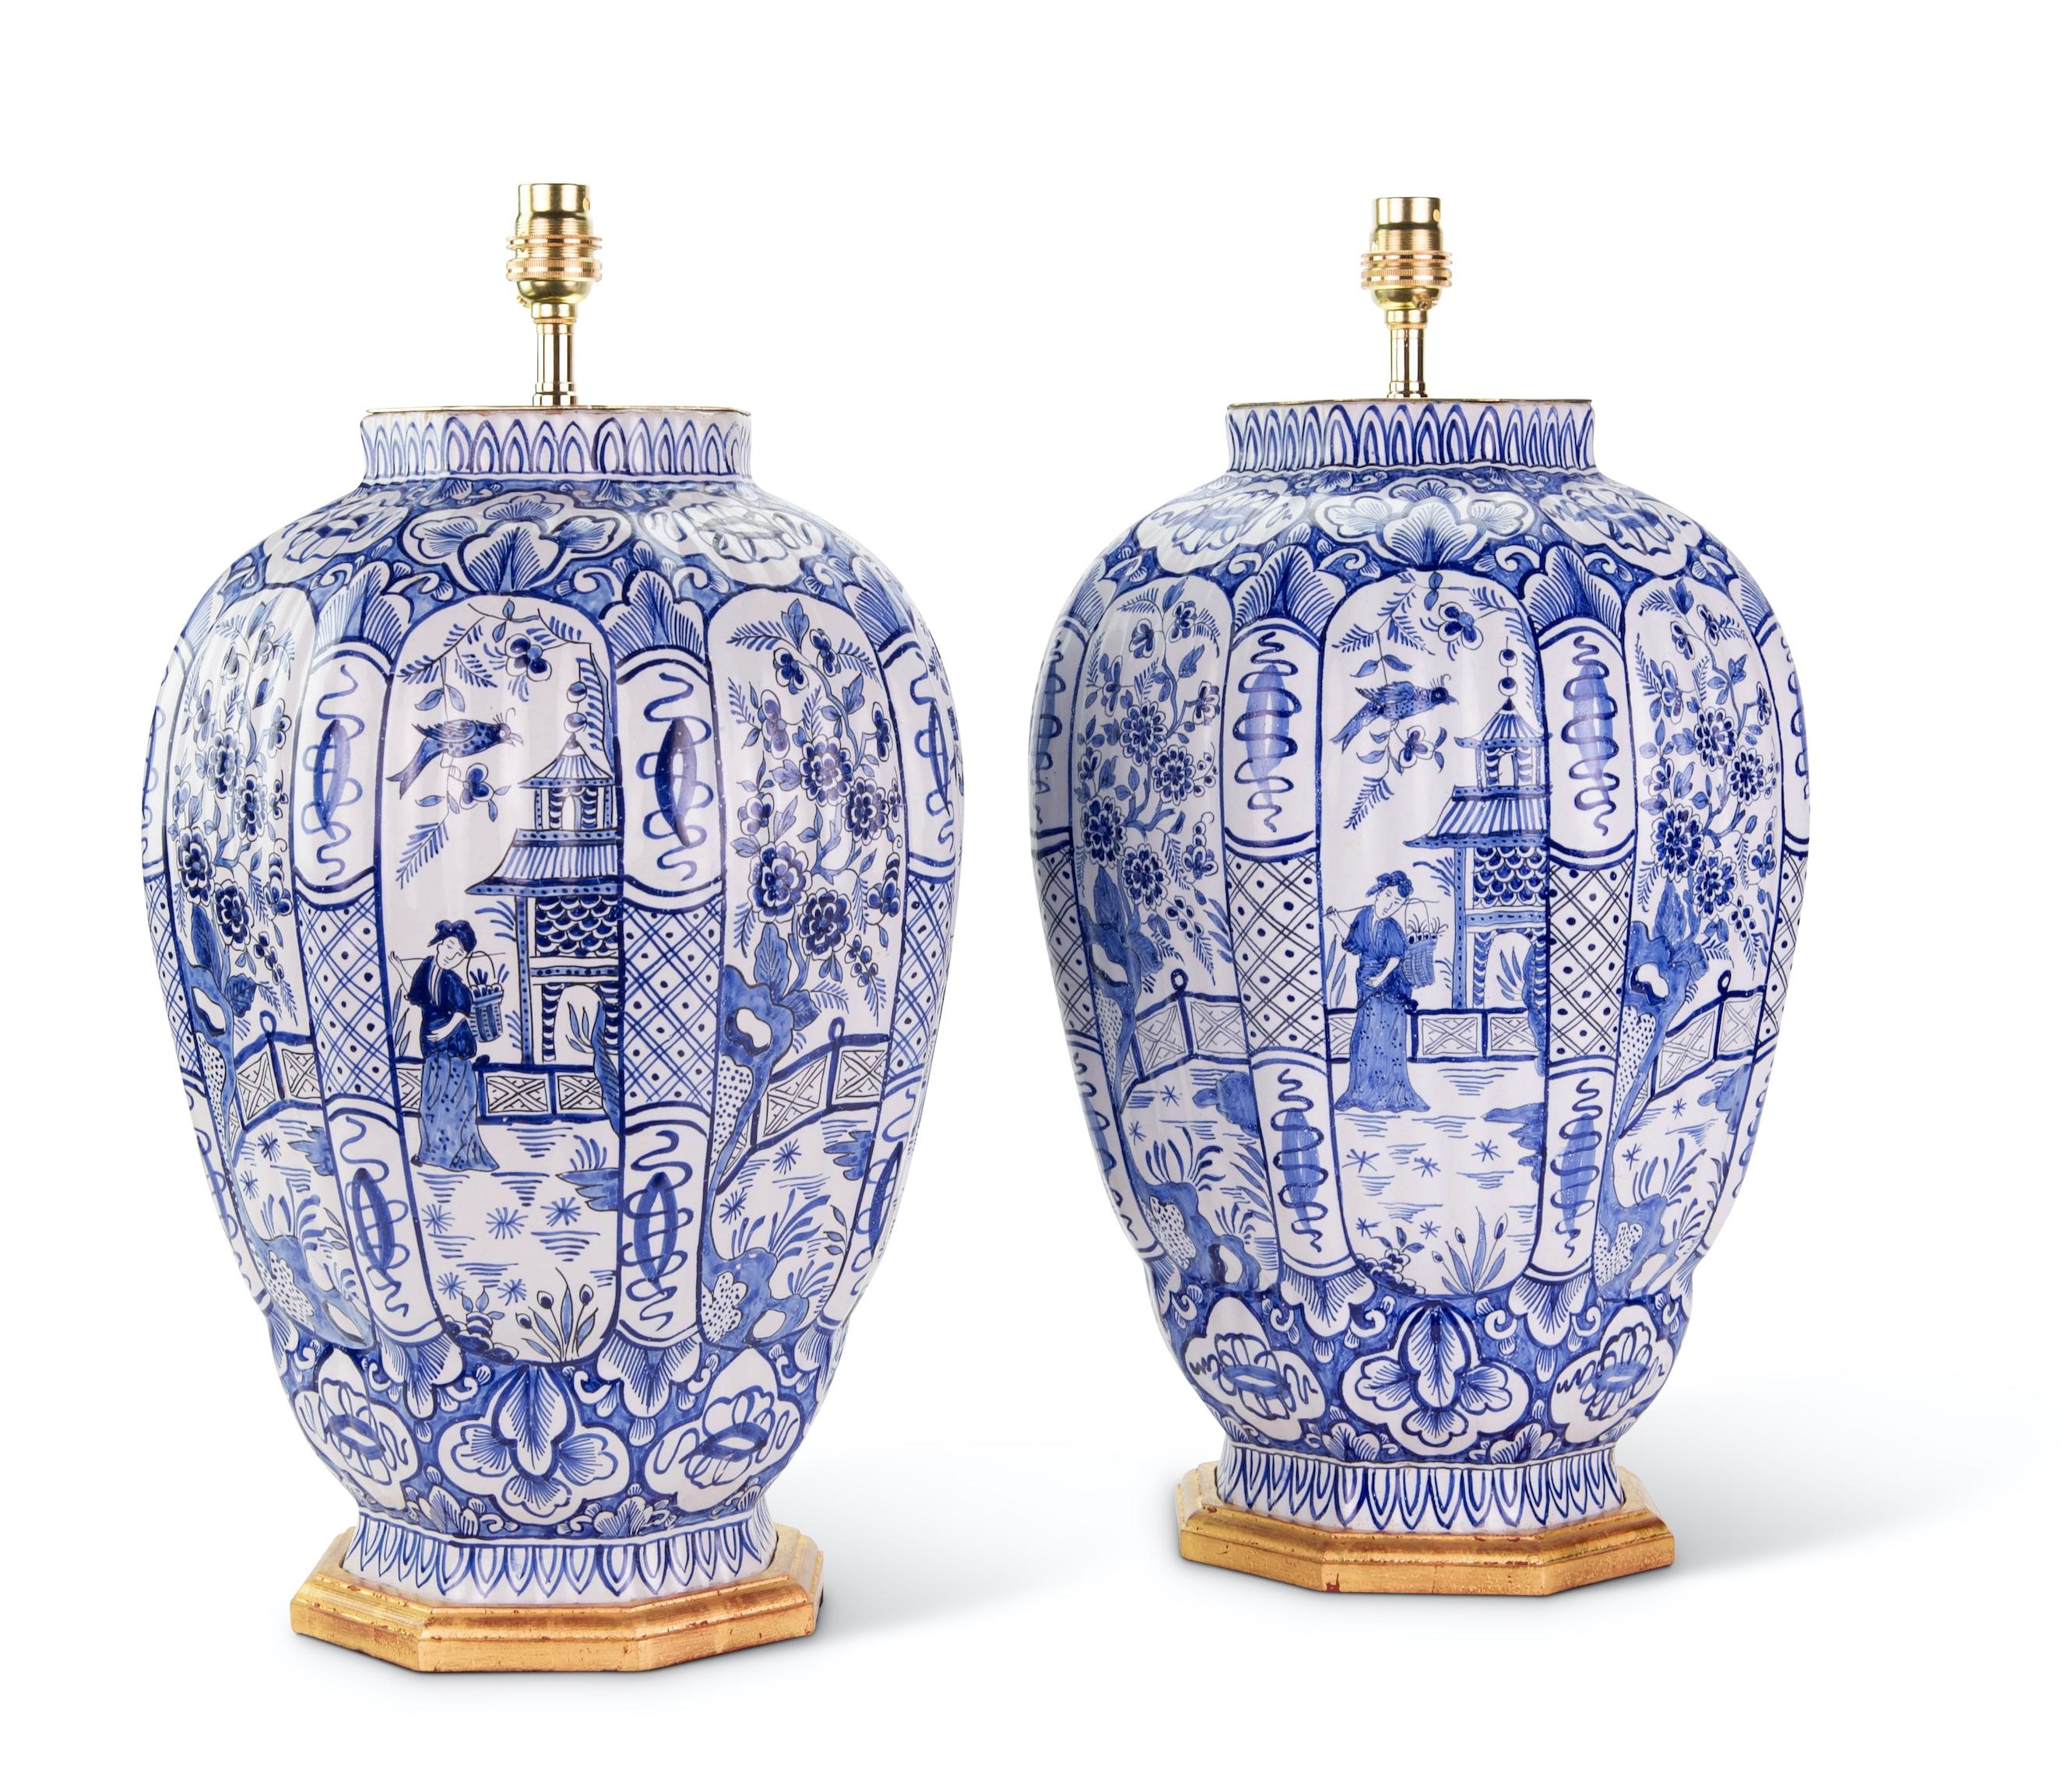 A fine pair of large Dutch Delft blue and white vases, with octagonal gadrooned bodies, decorated in tones of blue on a white background, with panels of courtly figures in garden scenes with pavilions and birds, with further stylised